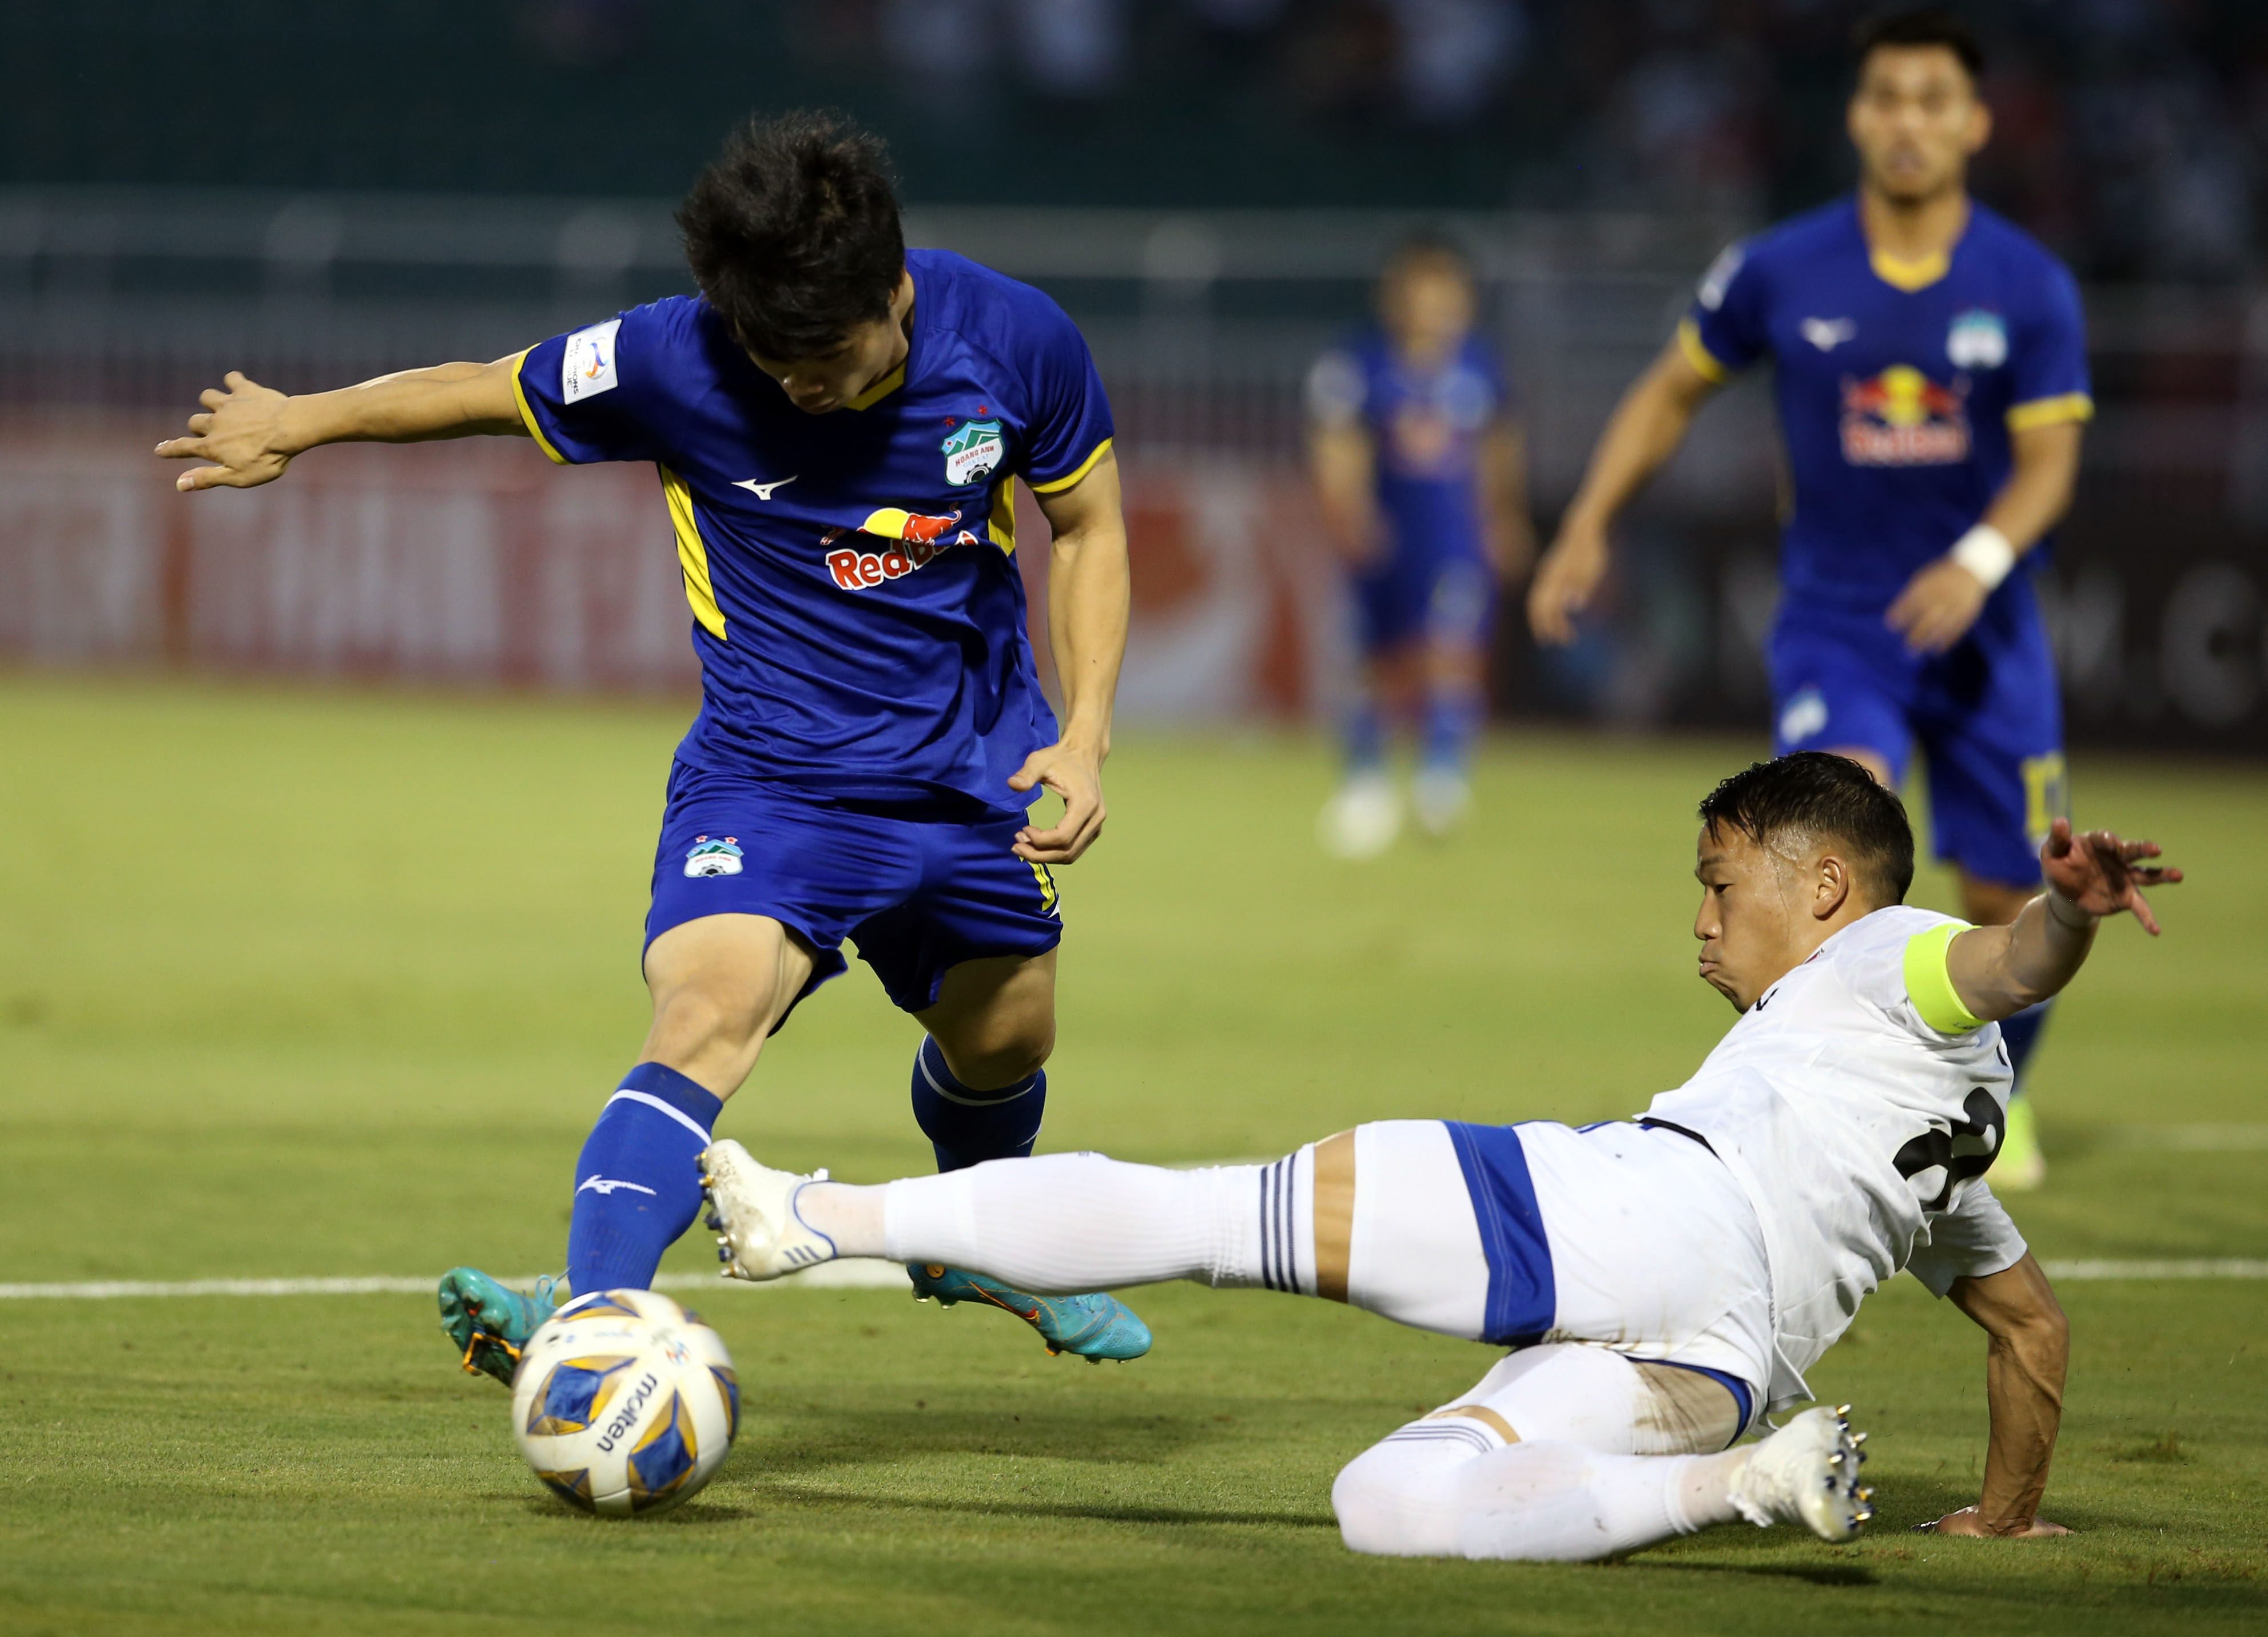 Nguyen Cong Phuong (L) of Hoang Anh Gia Lai during the opener at the AFC Champions League in Ho Chi Minh City, April 16, 2022. Photo: N.K. / Tuoi Tre